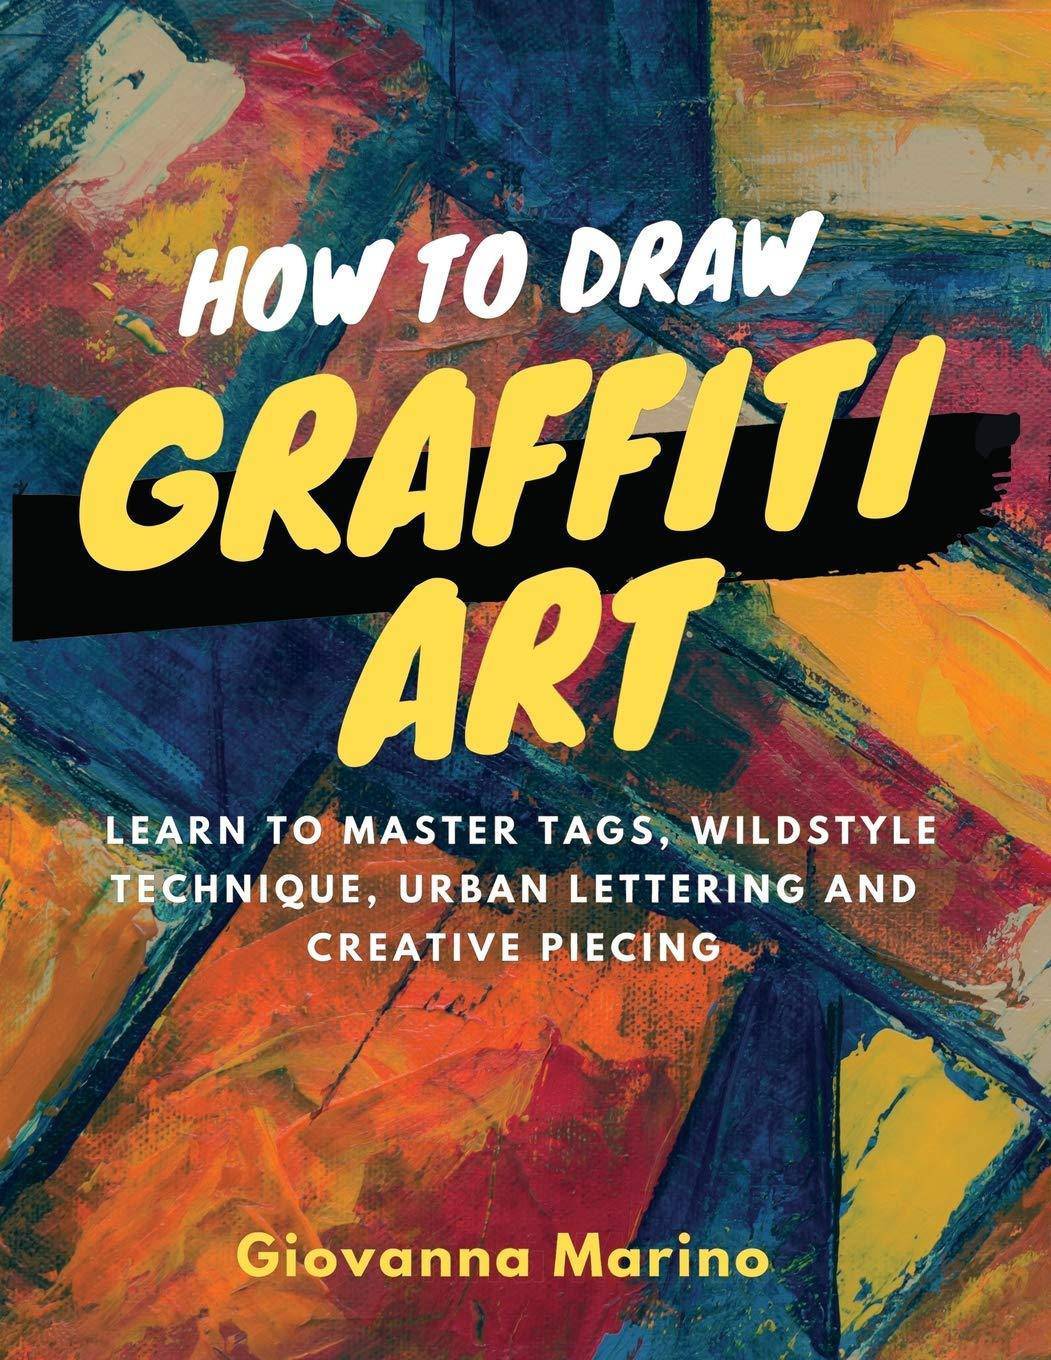 How to Draw Graffiti Art: Learn to Master Tags, Wildstyle Techni - SureShot Books Publishing LLC